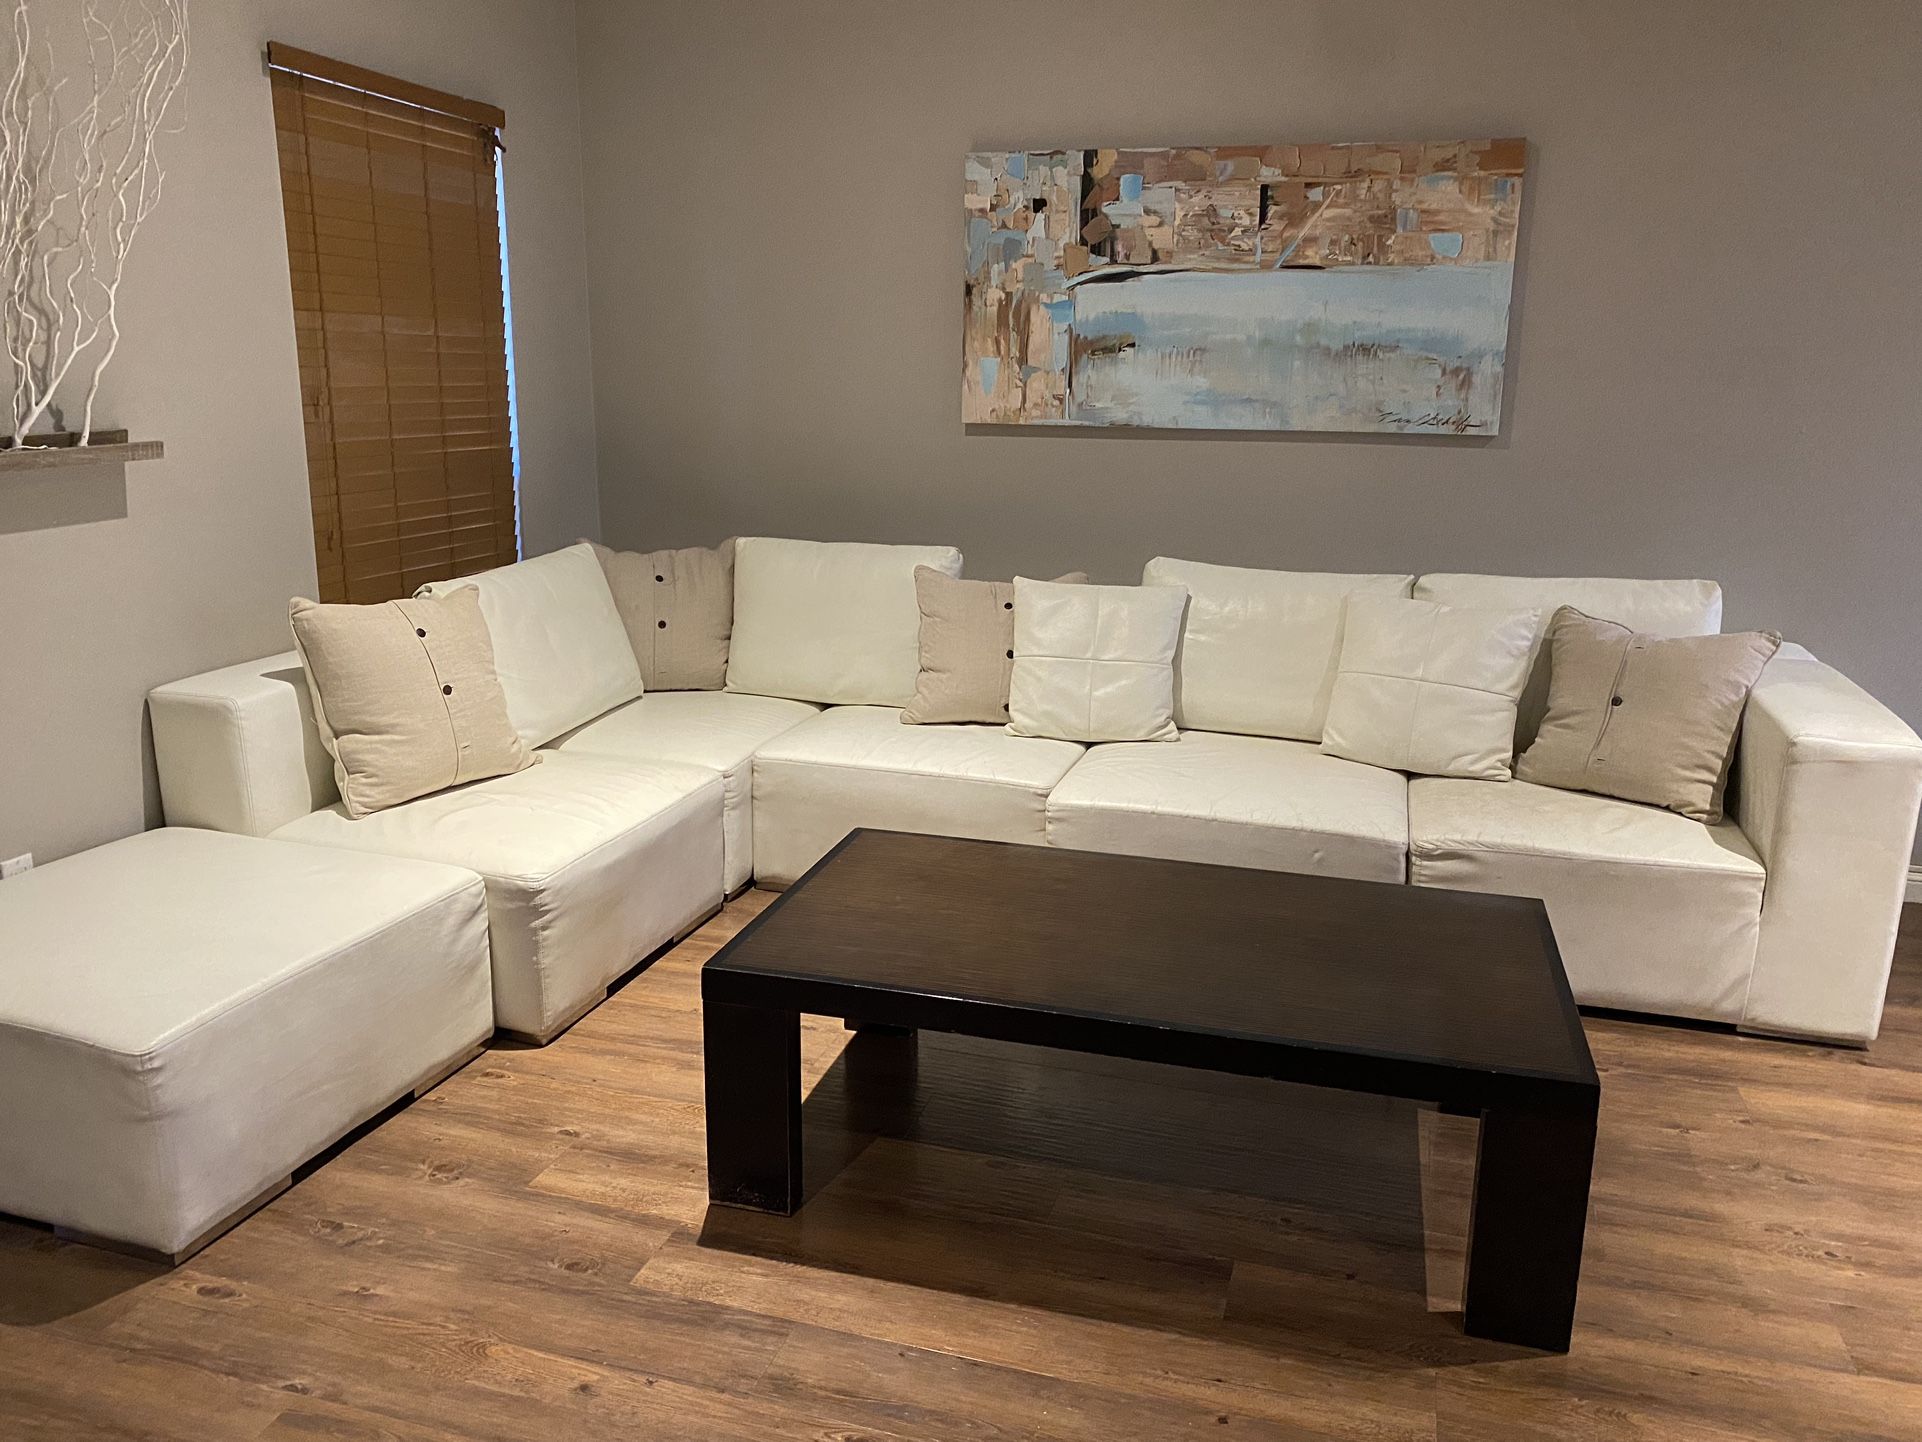 6 Piece Sectional White Leather Couch